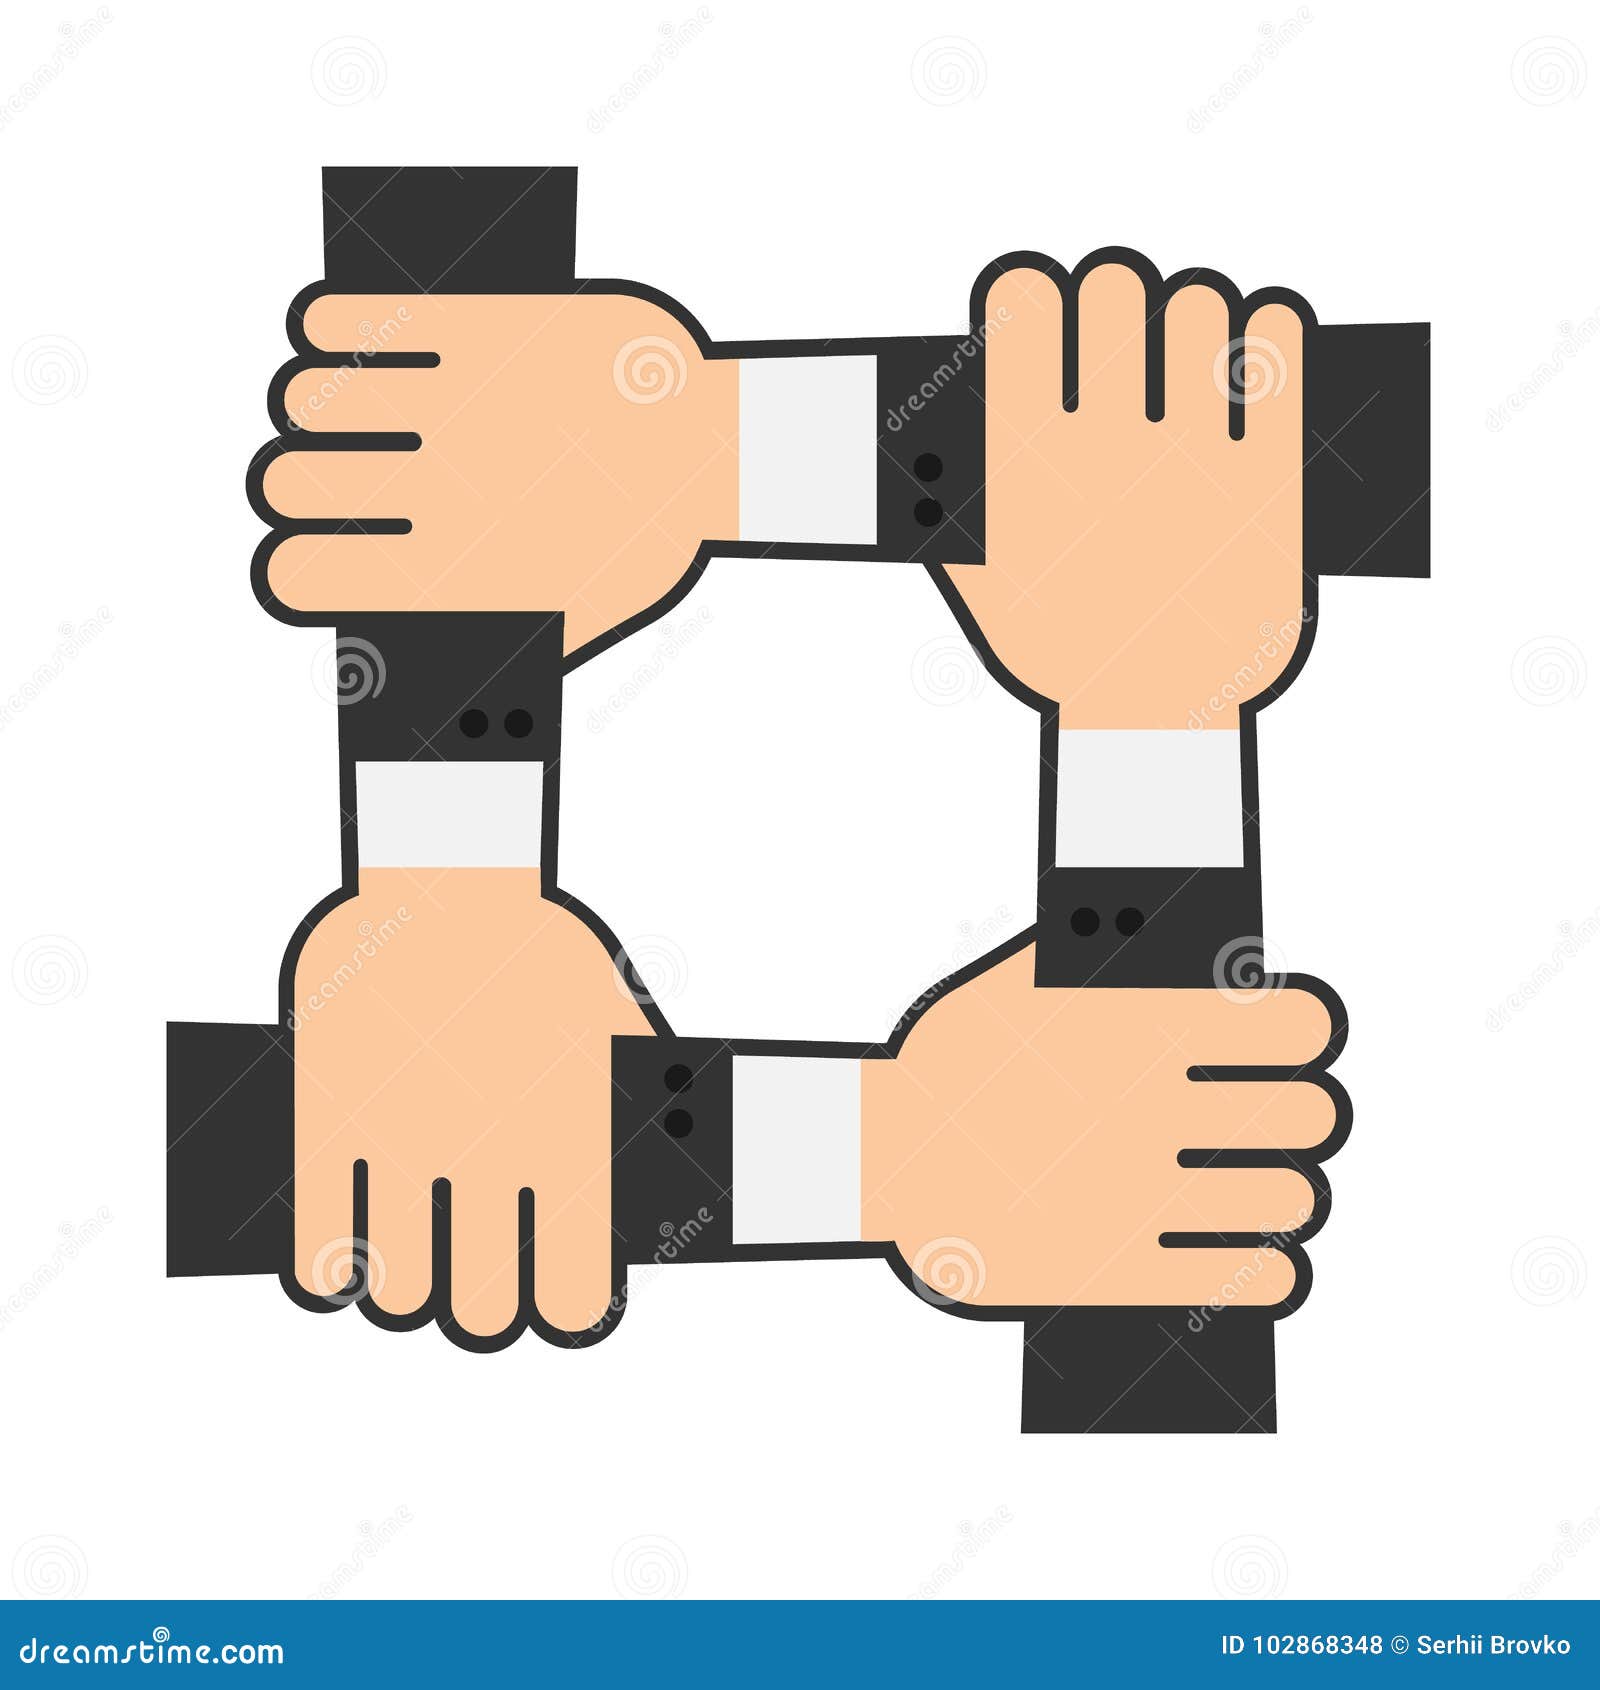 Four Hands Holding Wrist Stock Illustrations – 60 Four Hands